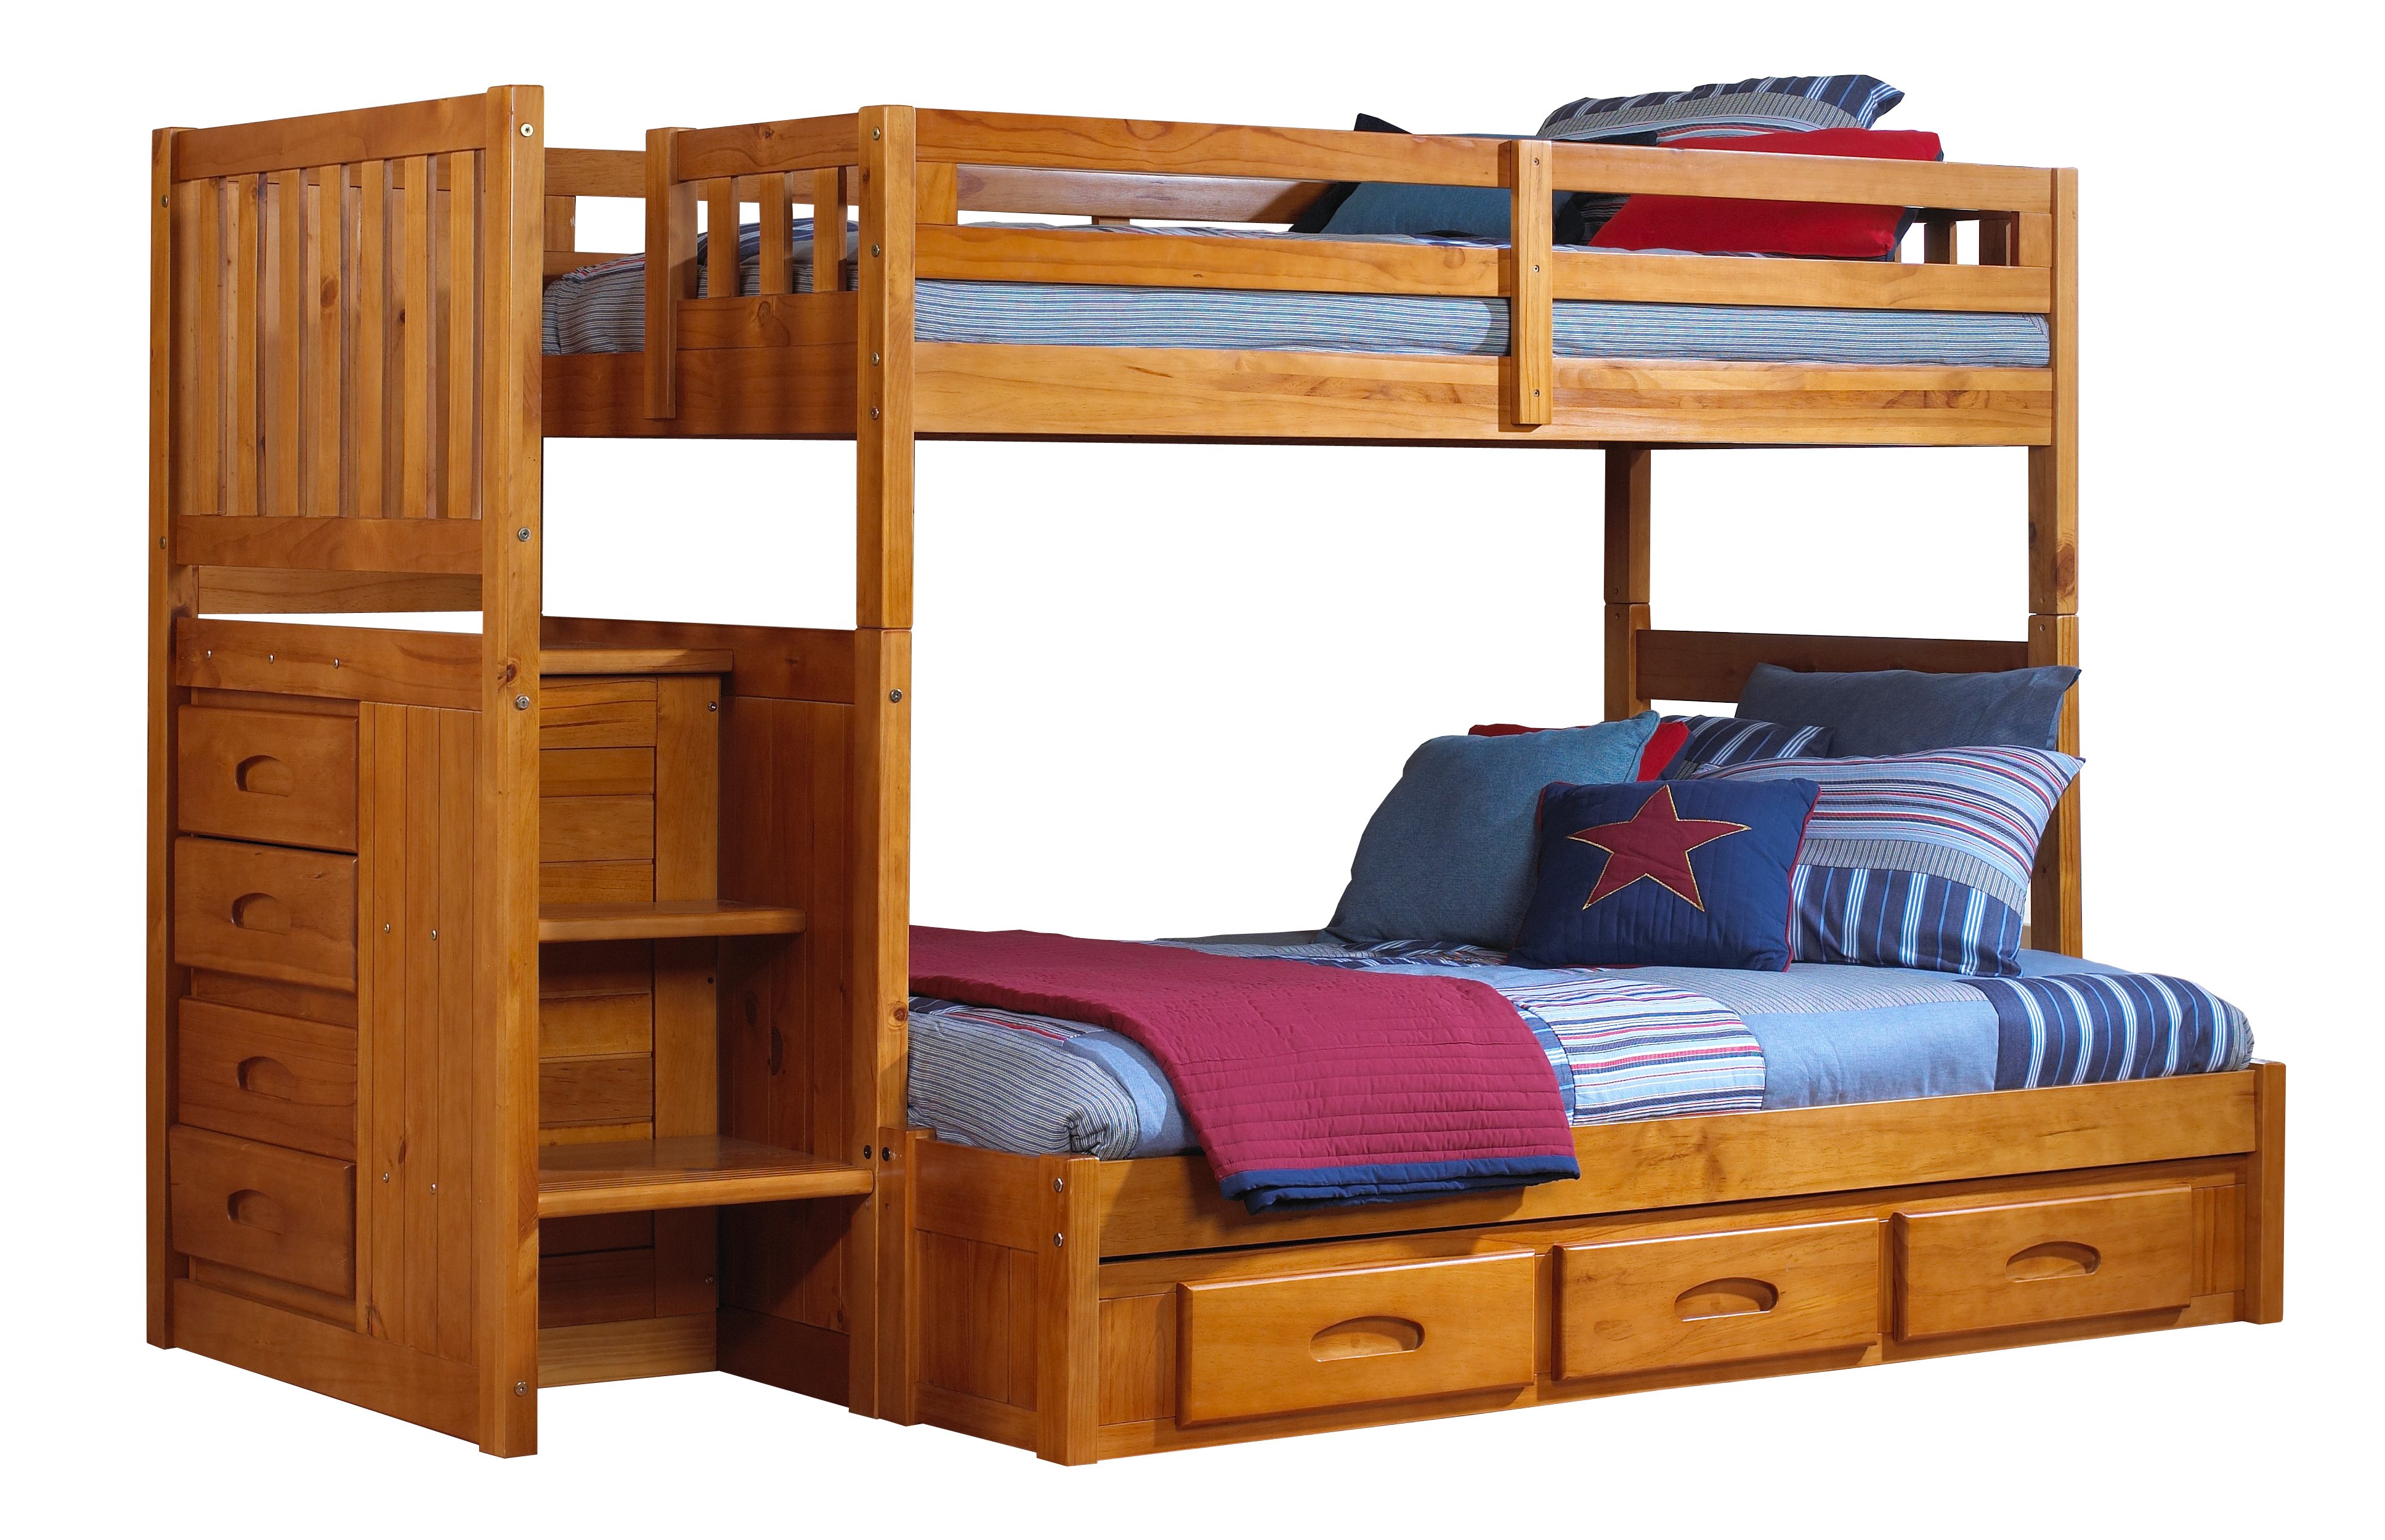 Honey Staircase Bunk Bed, Canyon Furniture Twin Step Bunk Bed